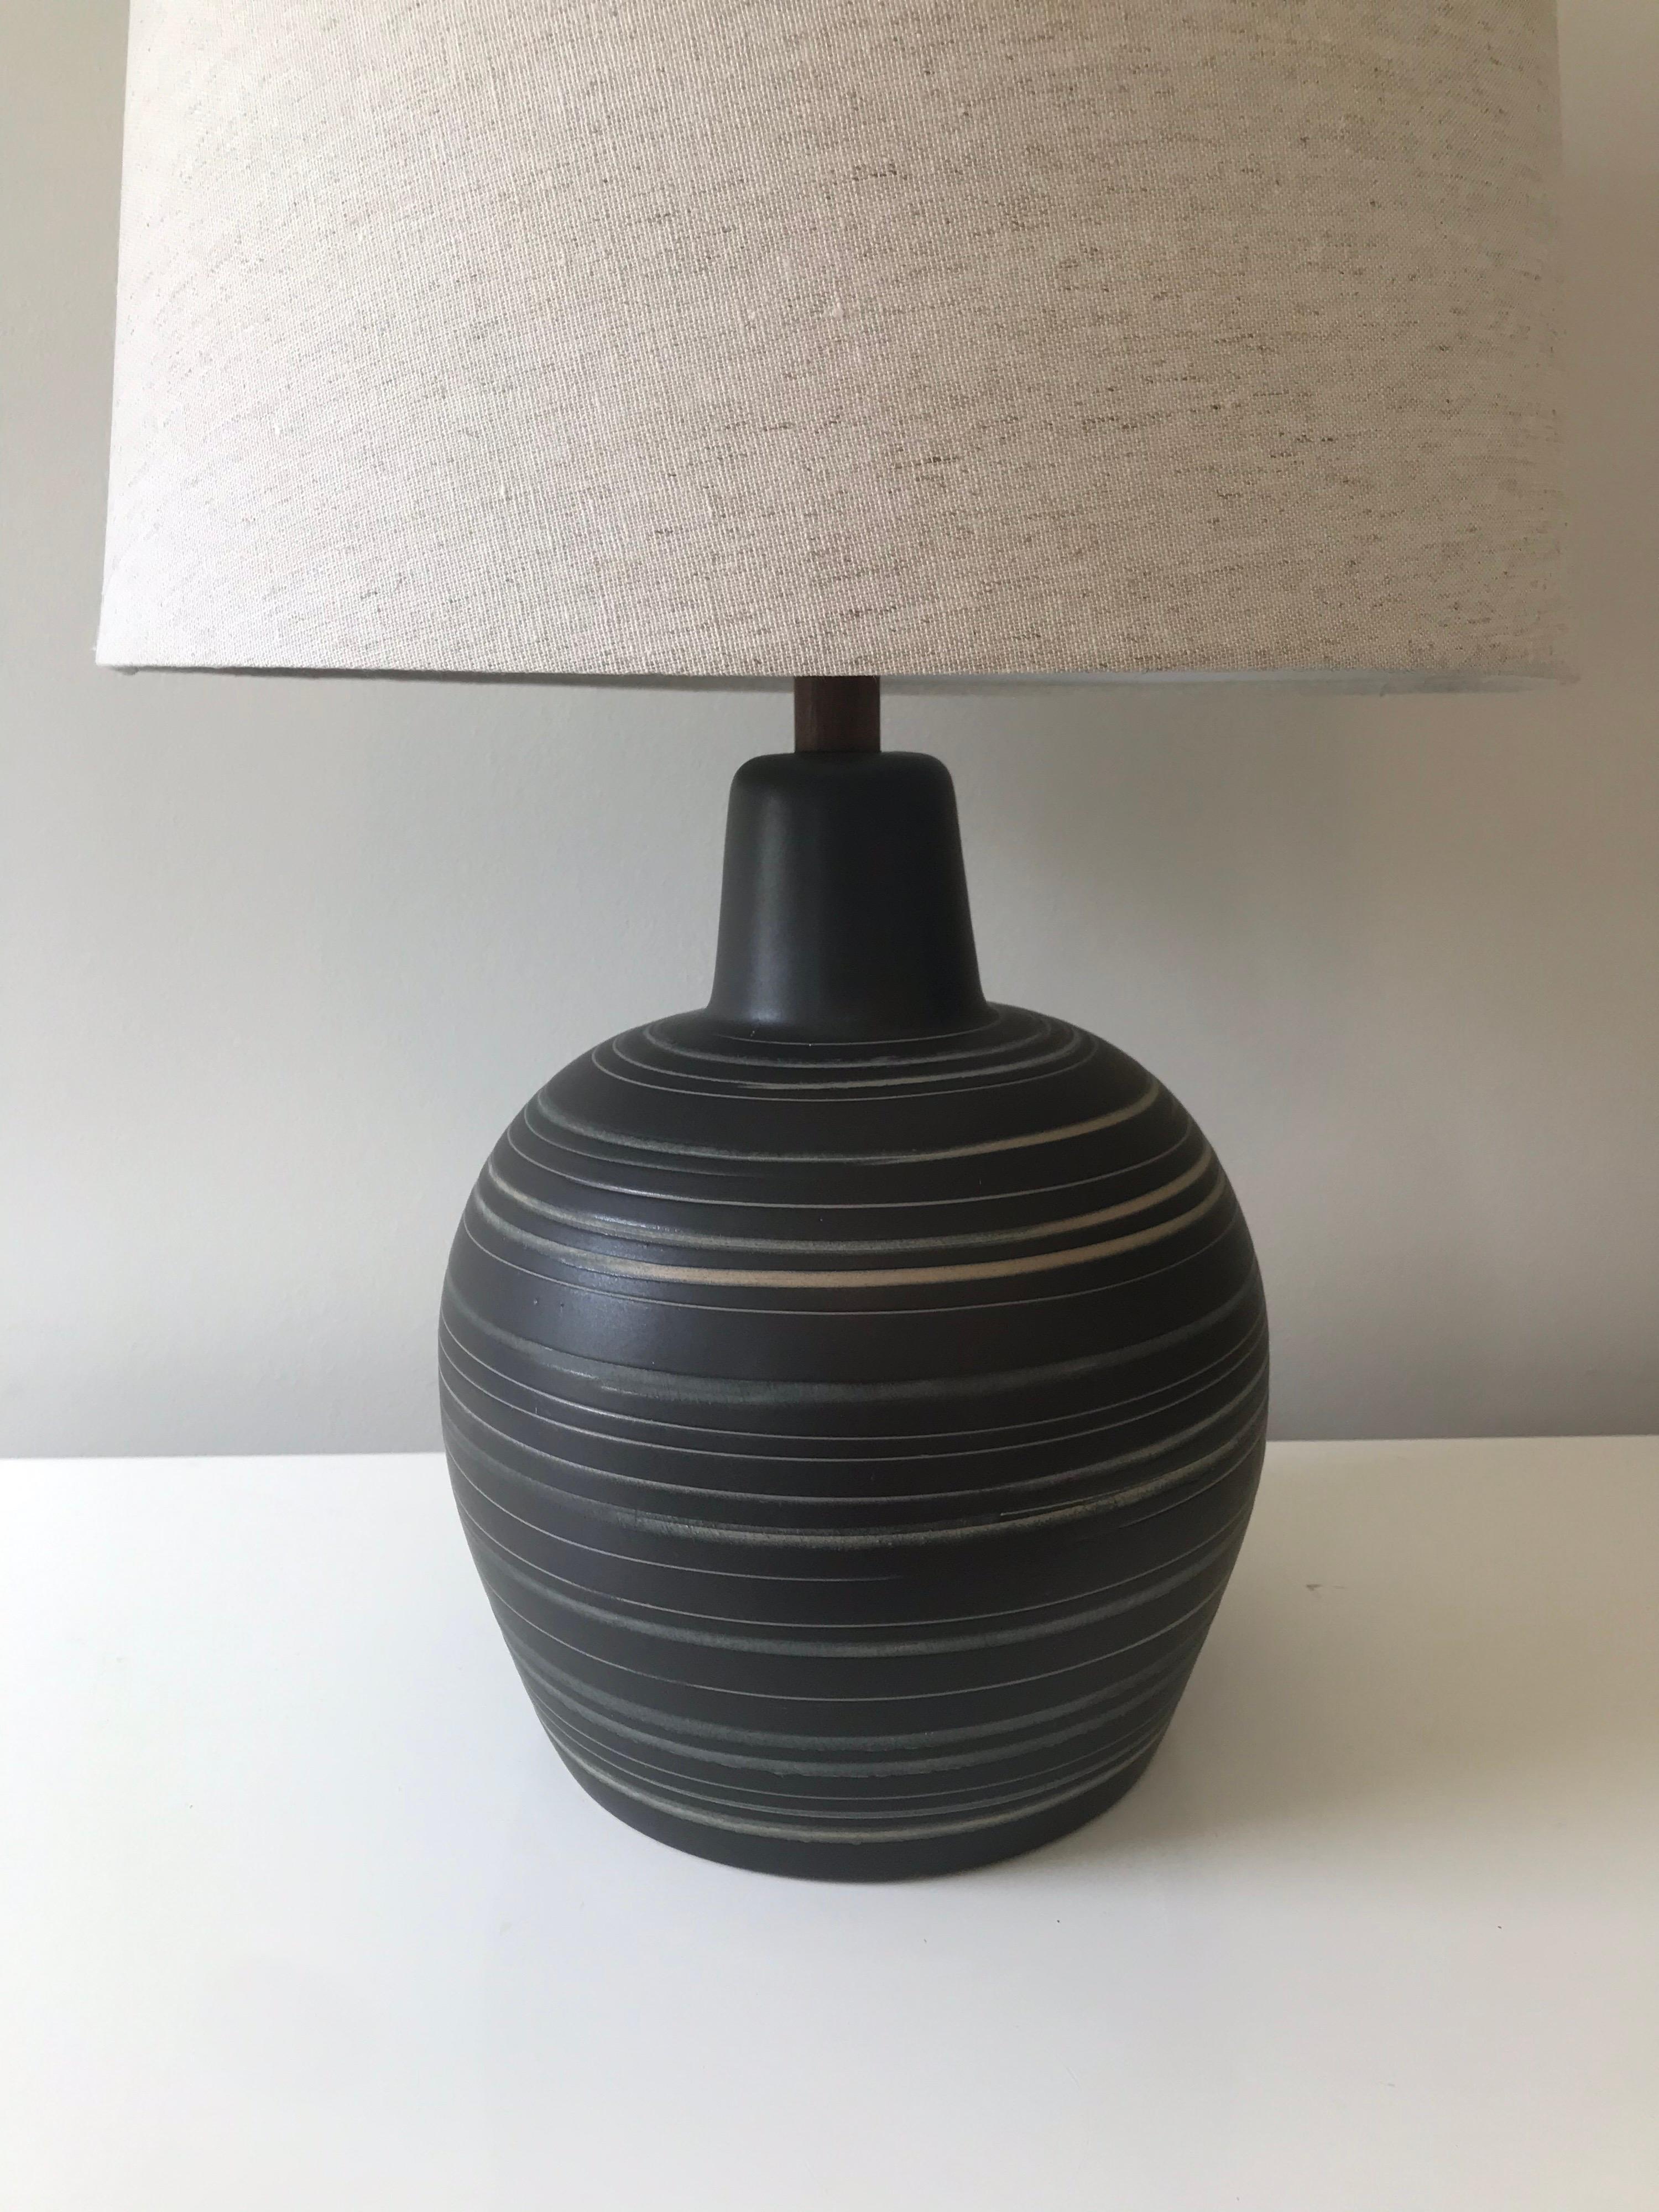 Jane and Gordon Martz Ceramic Table Lamp In Good Condition For Sale In St.Petersburg, FL